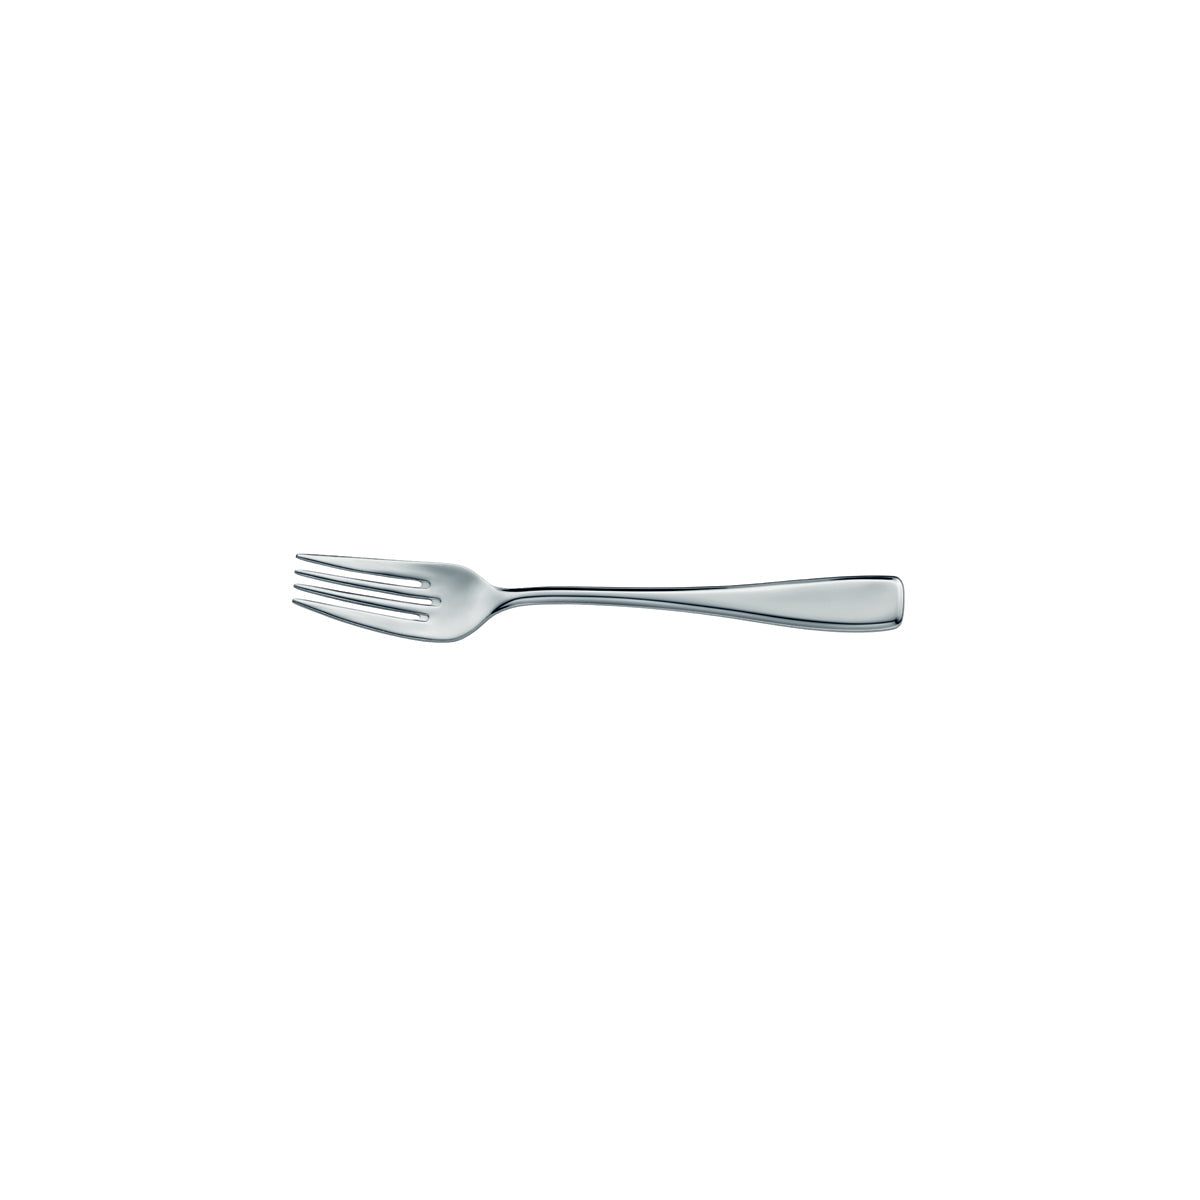 10.7935.6062 WMF Solid Fish Fork Silverplated Tomkin Australia Hospitality Supplies